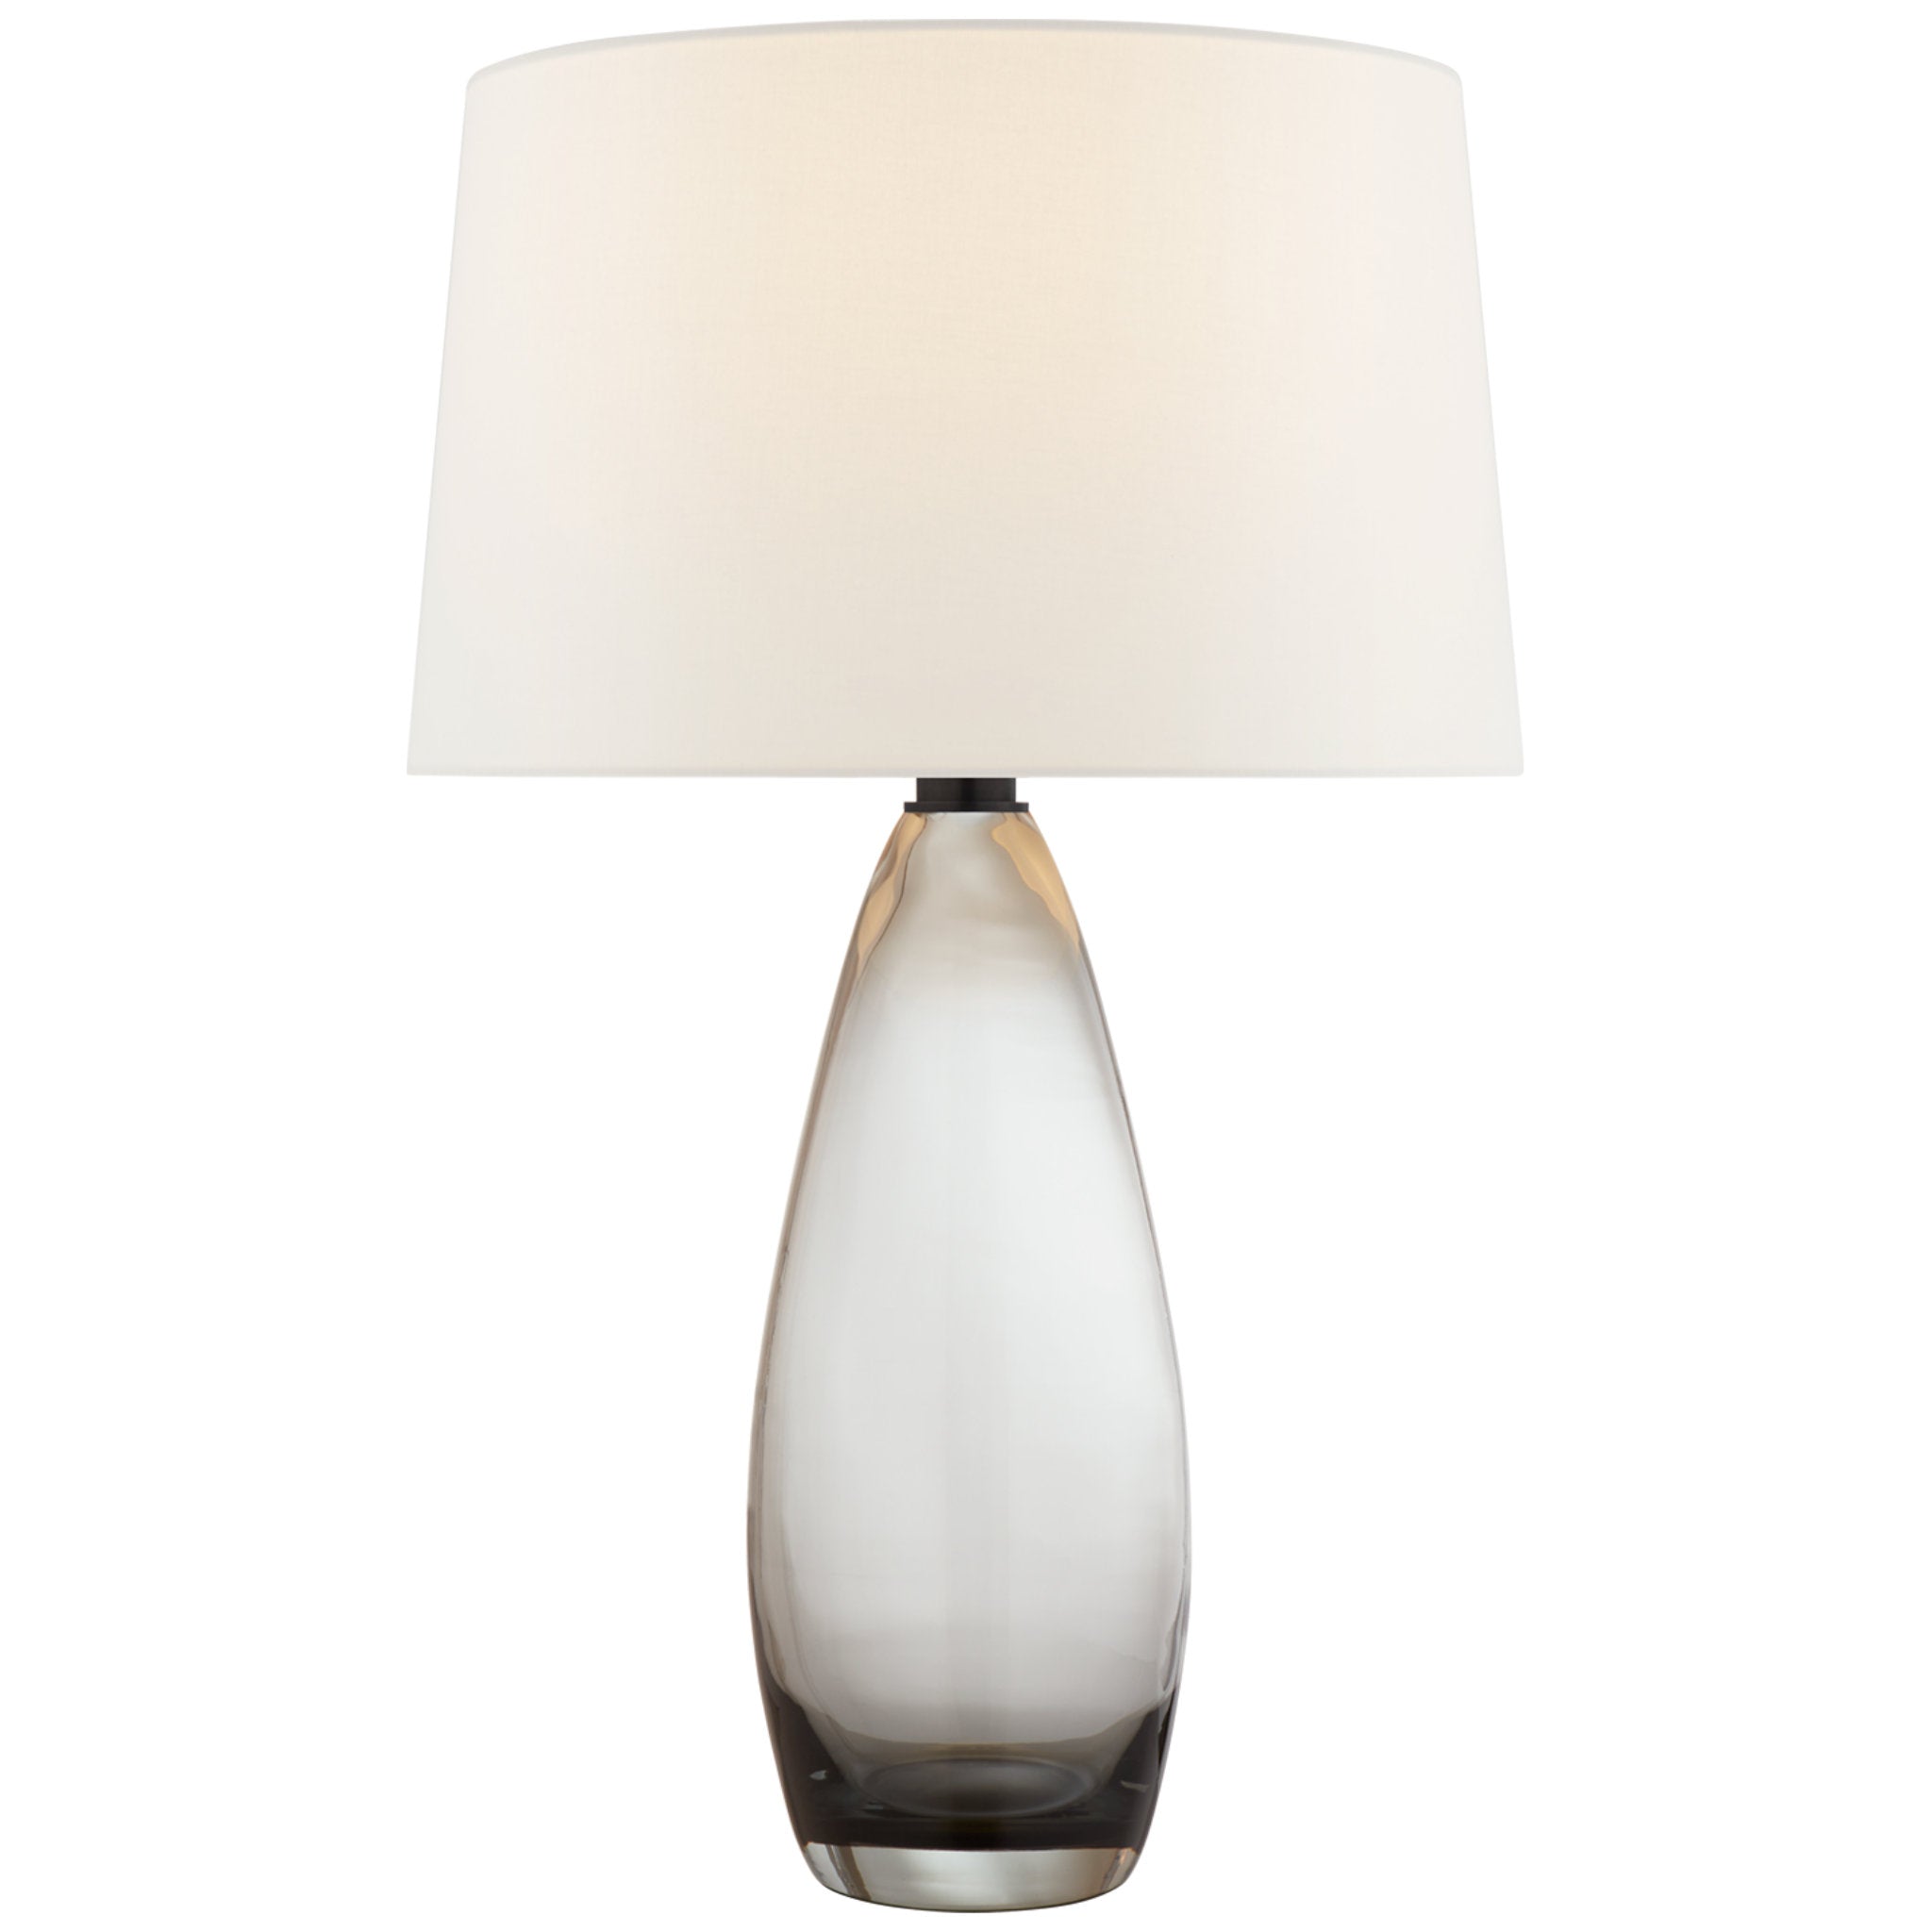 Chapman & Myers Myla Large Tall Table Lamp in Smoked Glass with Linen Shade